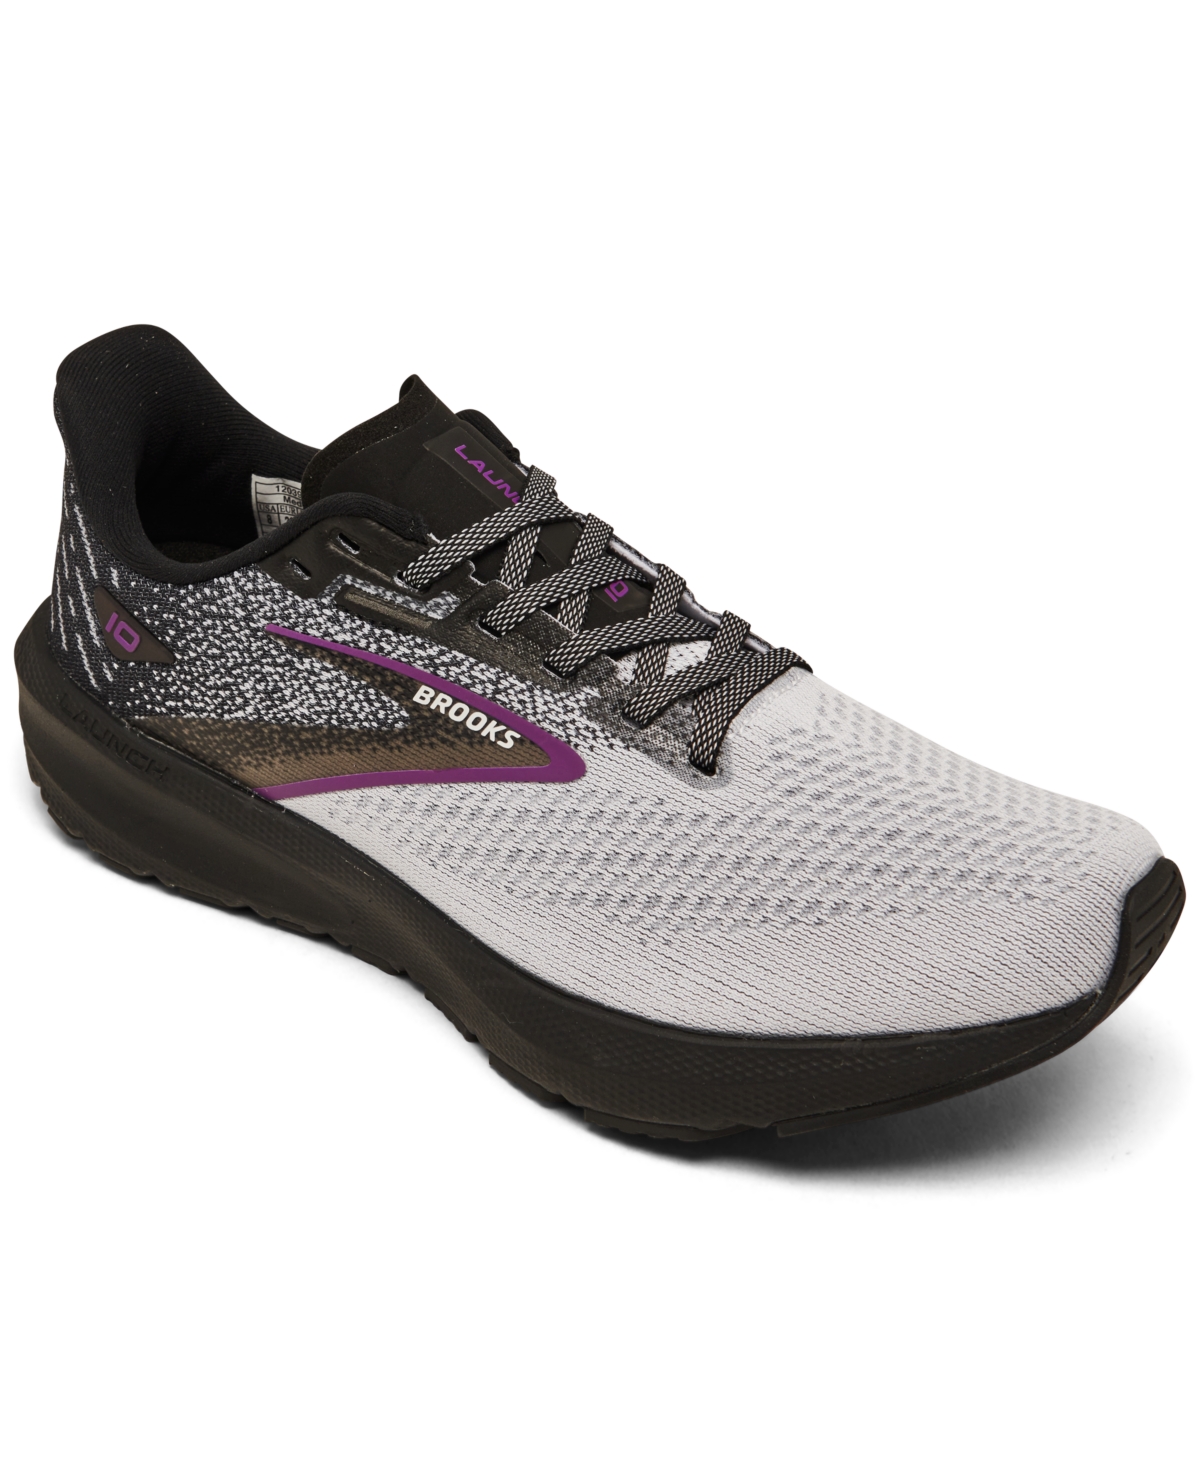 Women's Launch 10 Running Sneakers from Finish Line - Black, White, Violet